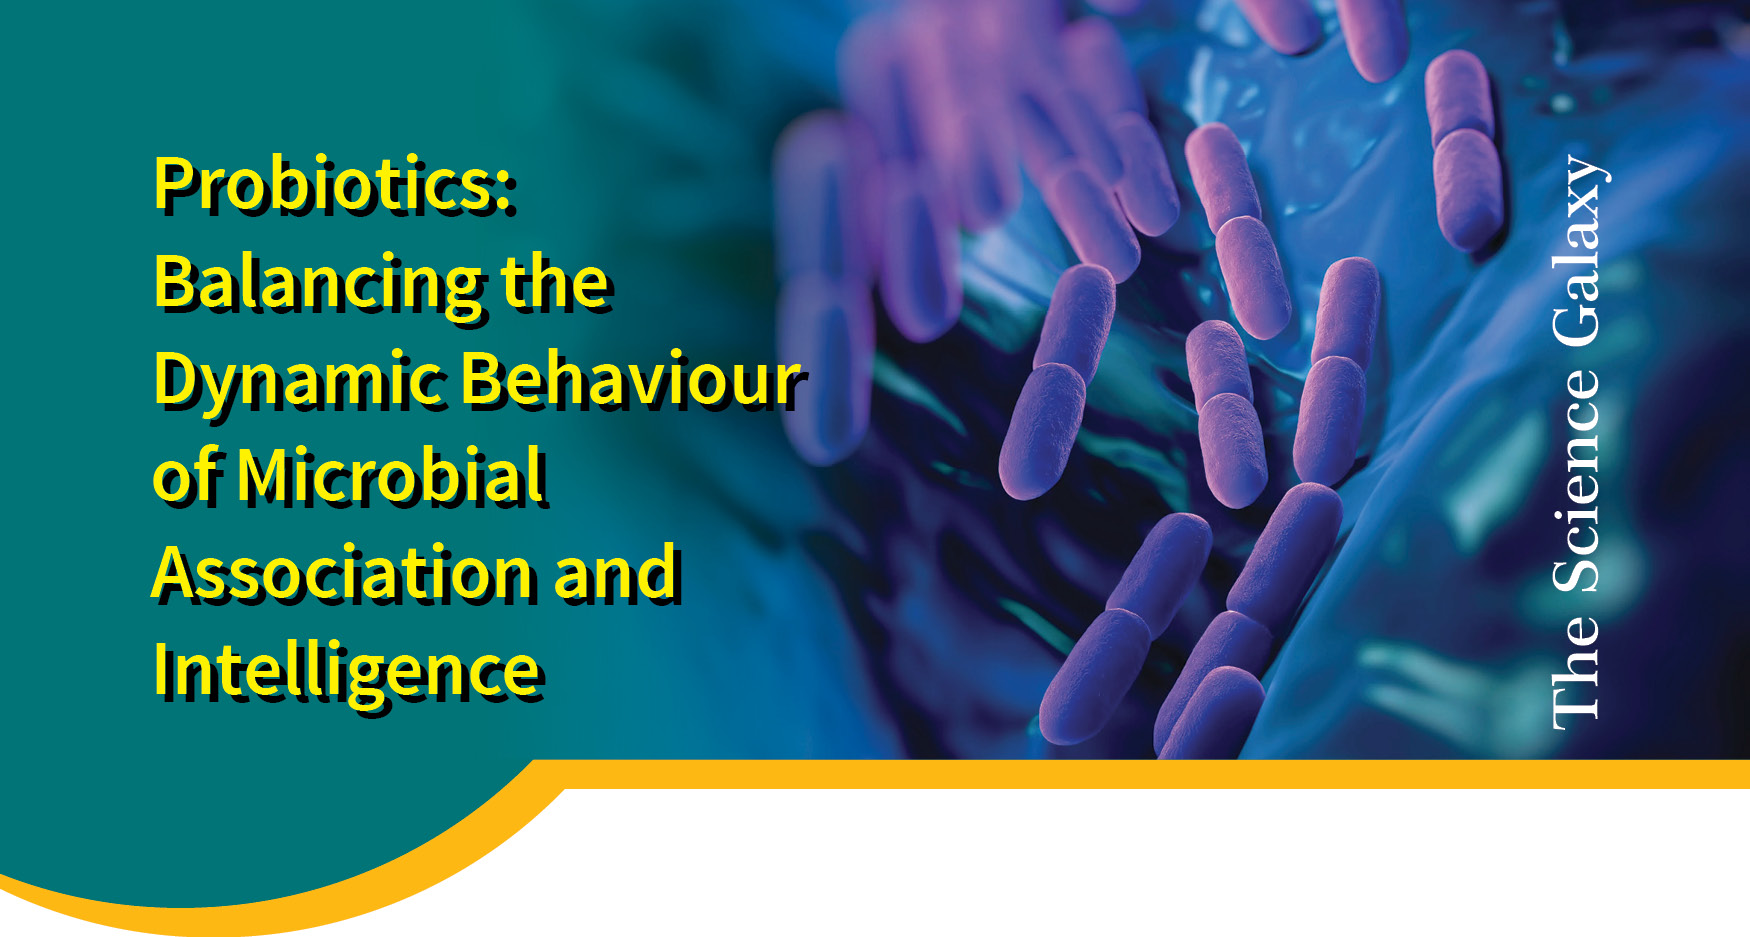 Probiotics: Balancing the Dynamic Behaviour of Microbial Association and Intelligence